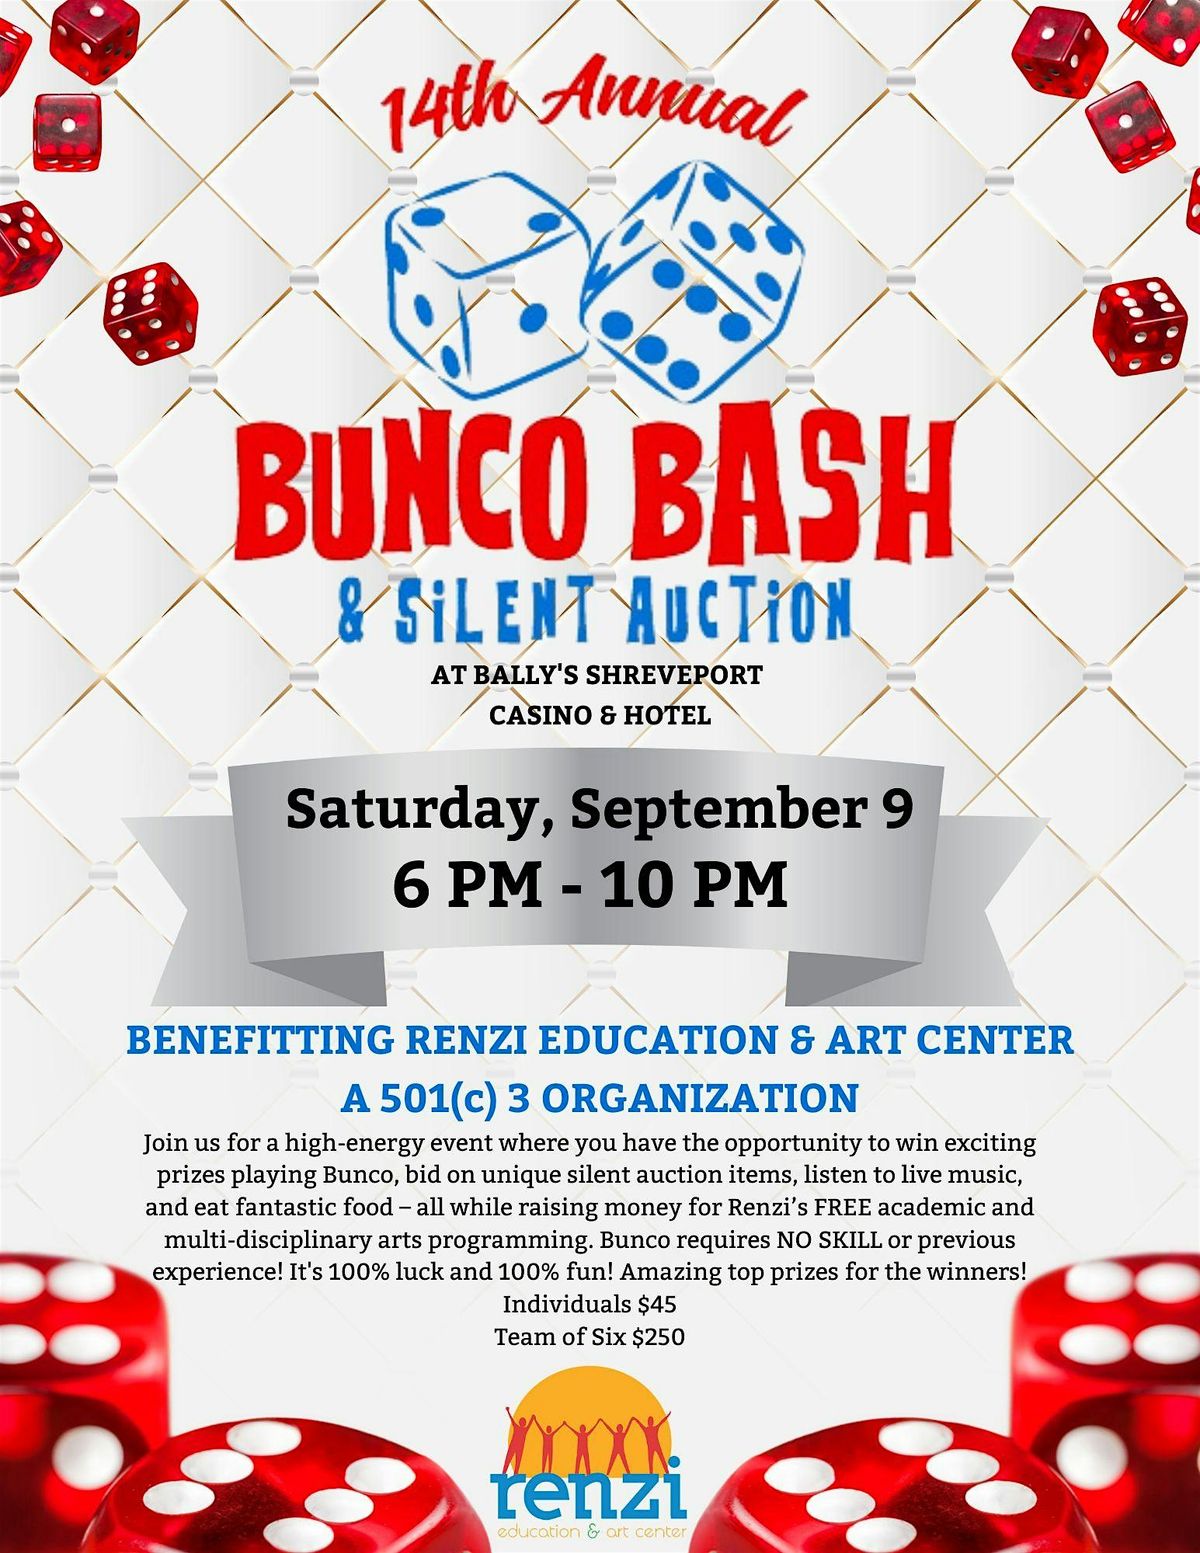 15th Annual Bunco Bash and Silent Auction